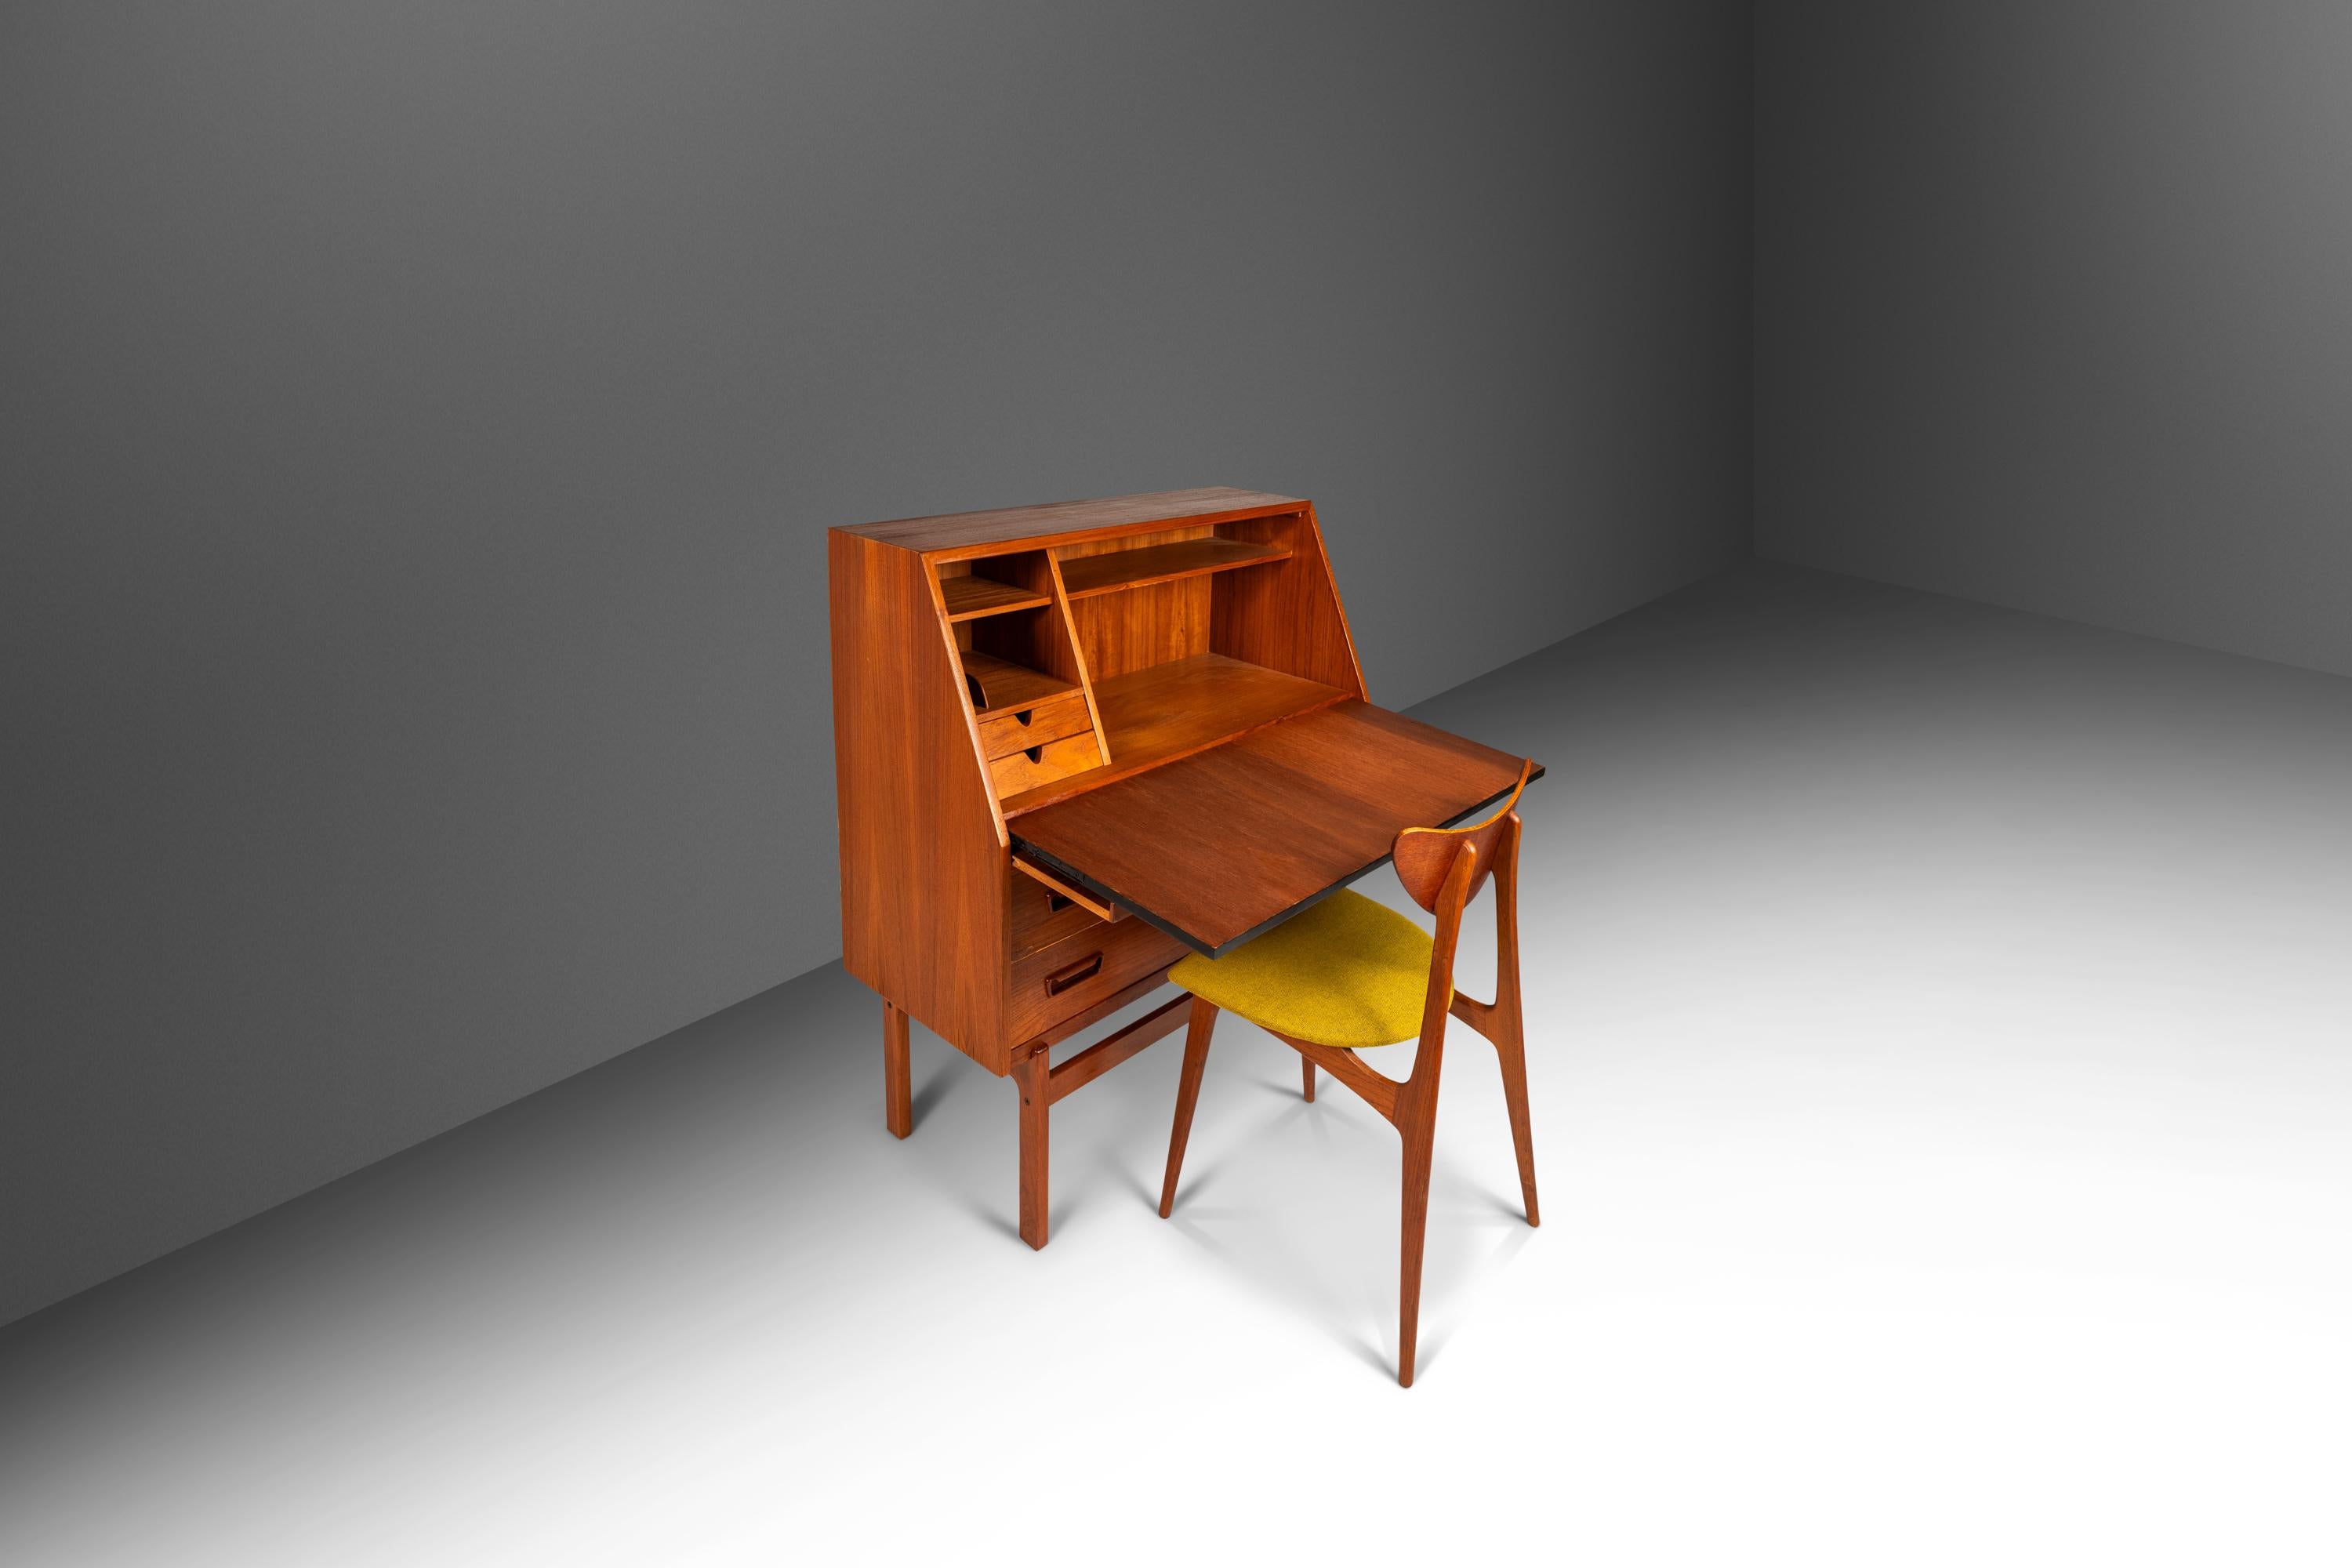 Introducing a freshly restored Model 68 secretary desk designed in the 1960s by the influential Arne Wahl Iversen for Vinde Møbelfabrik. Constructed from a mix of solid and veneered Burmese teak with exceptional old-growth woodgrains this